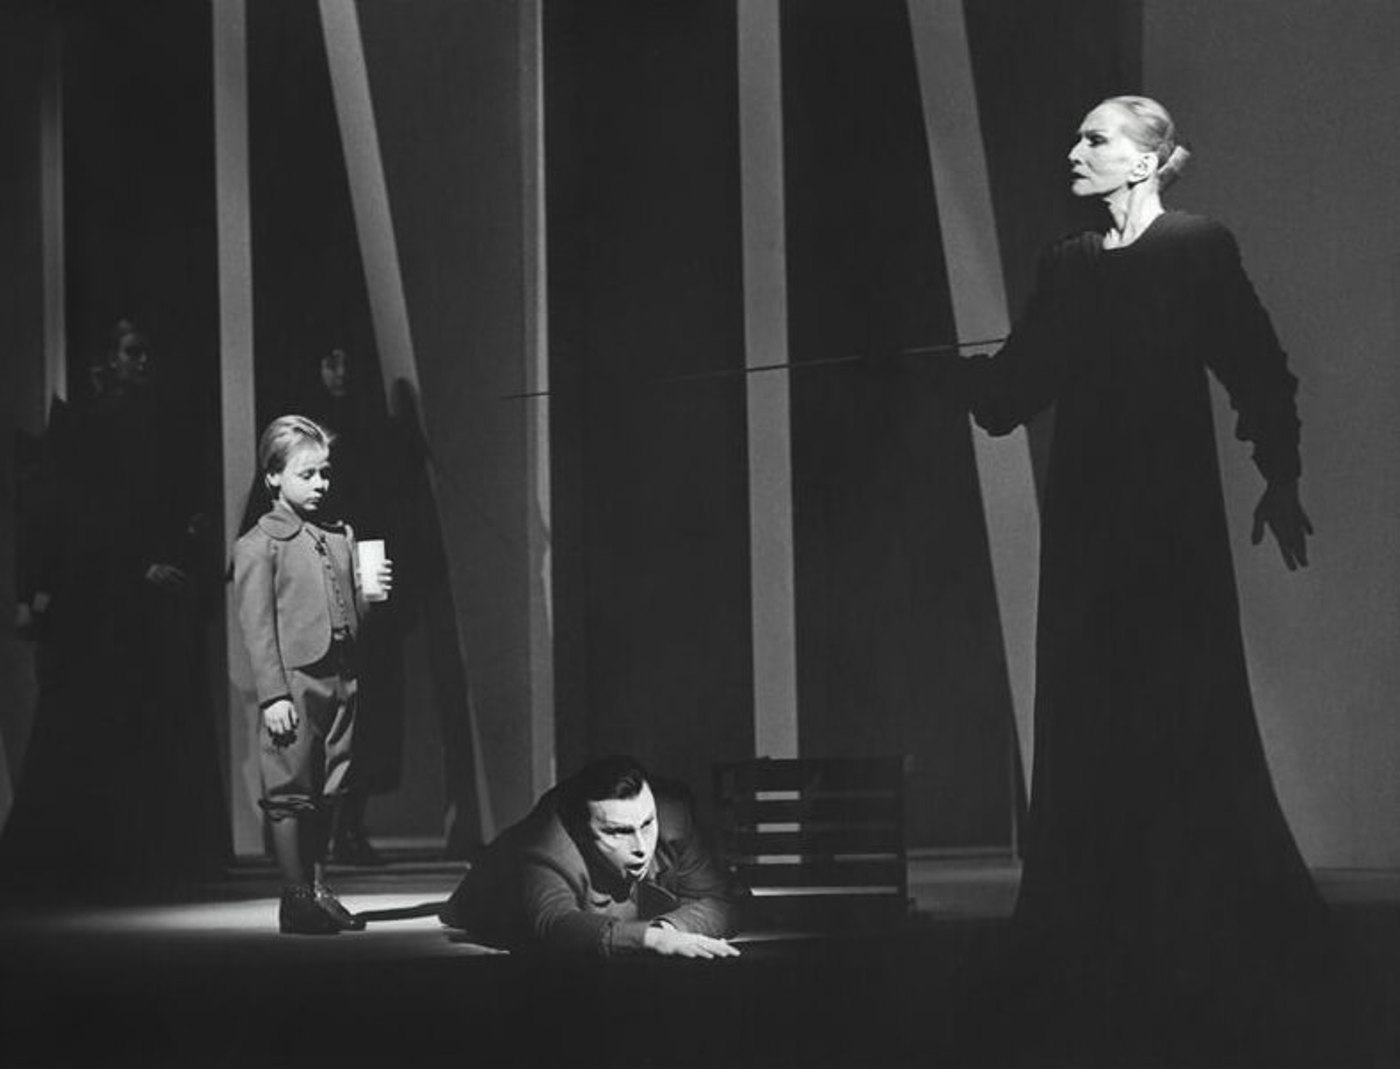 From the production of Janáček's Destiny in the National Theatre in 2001